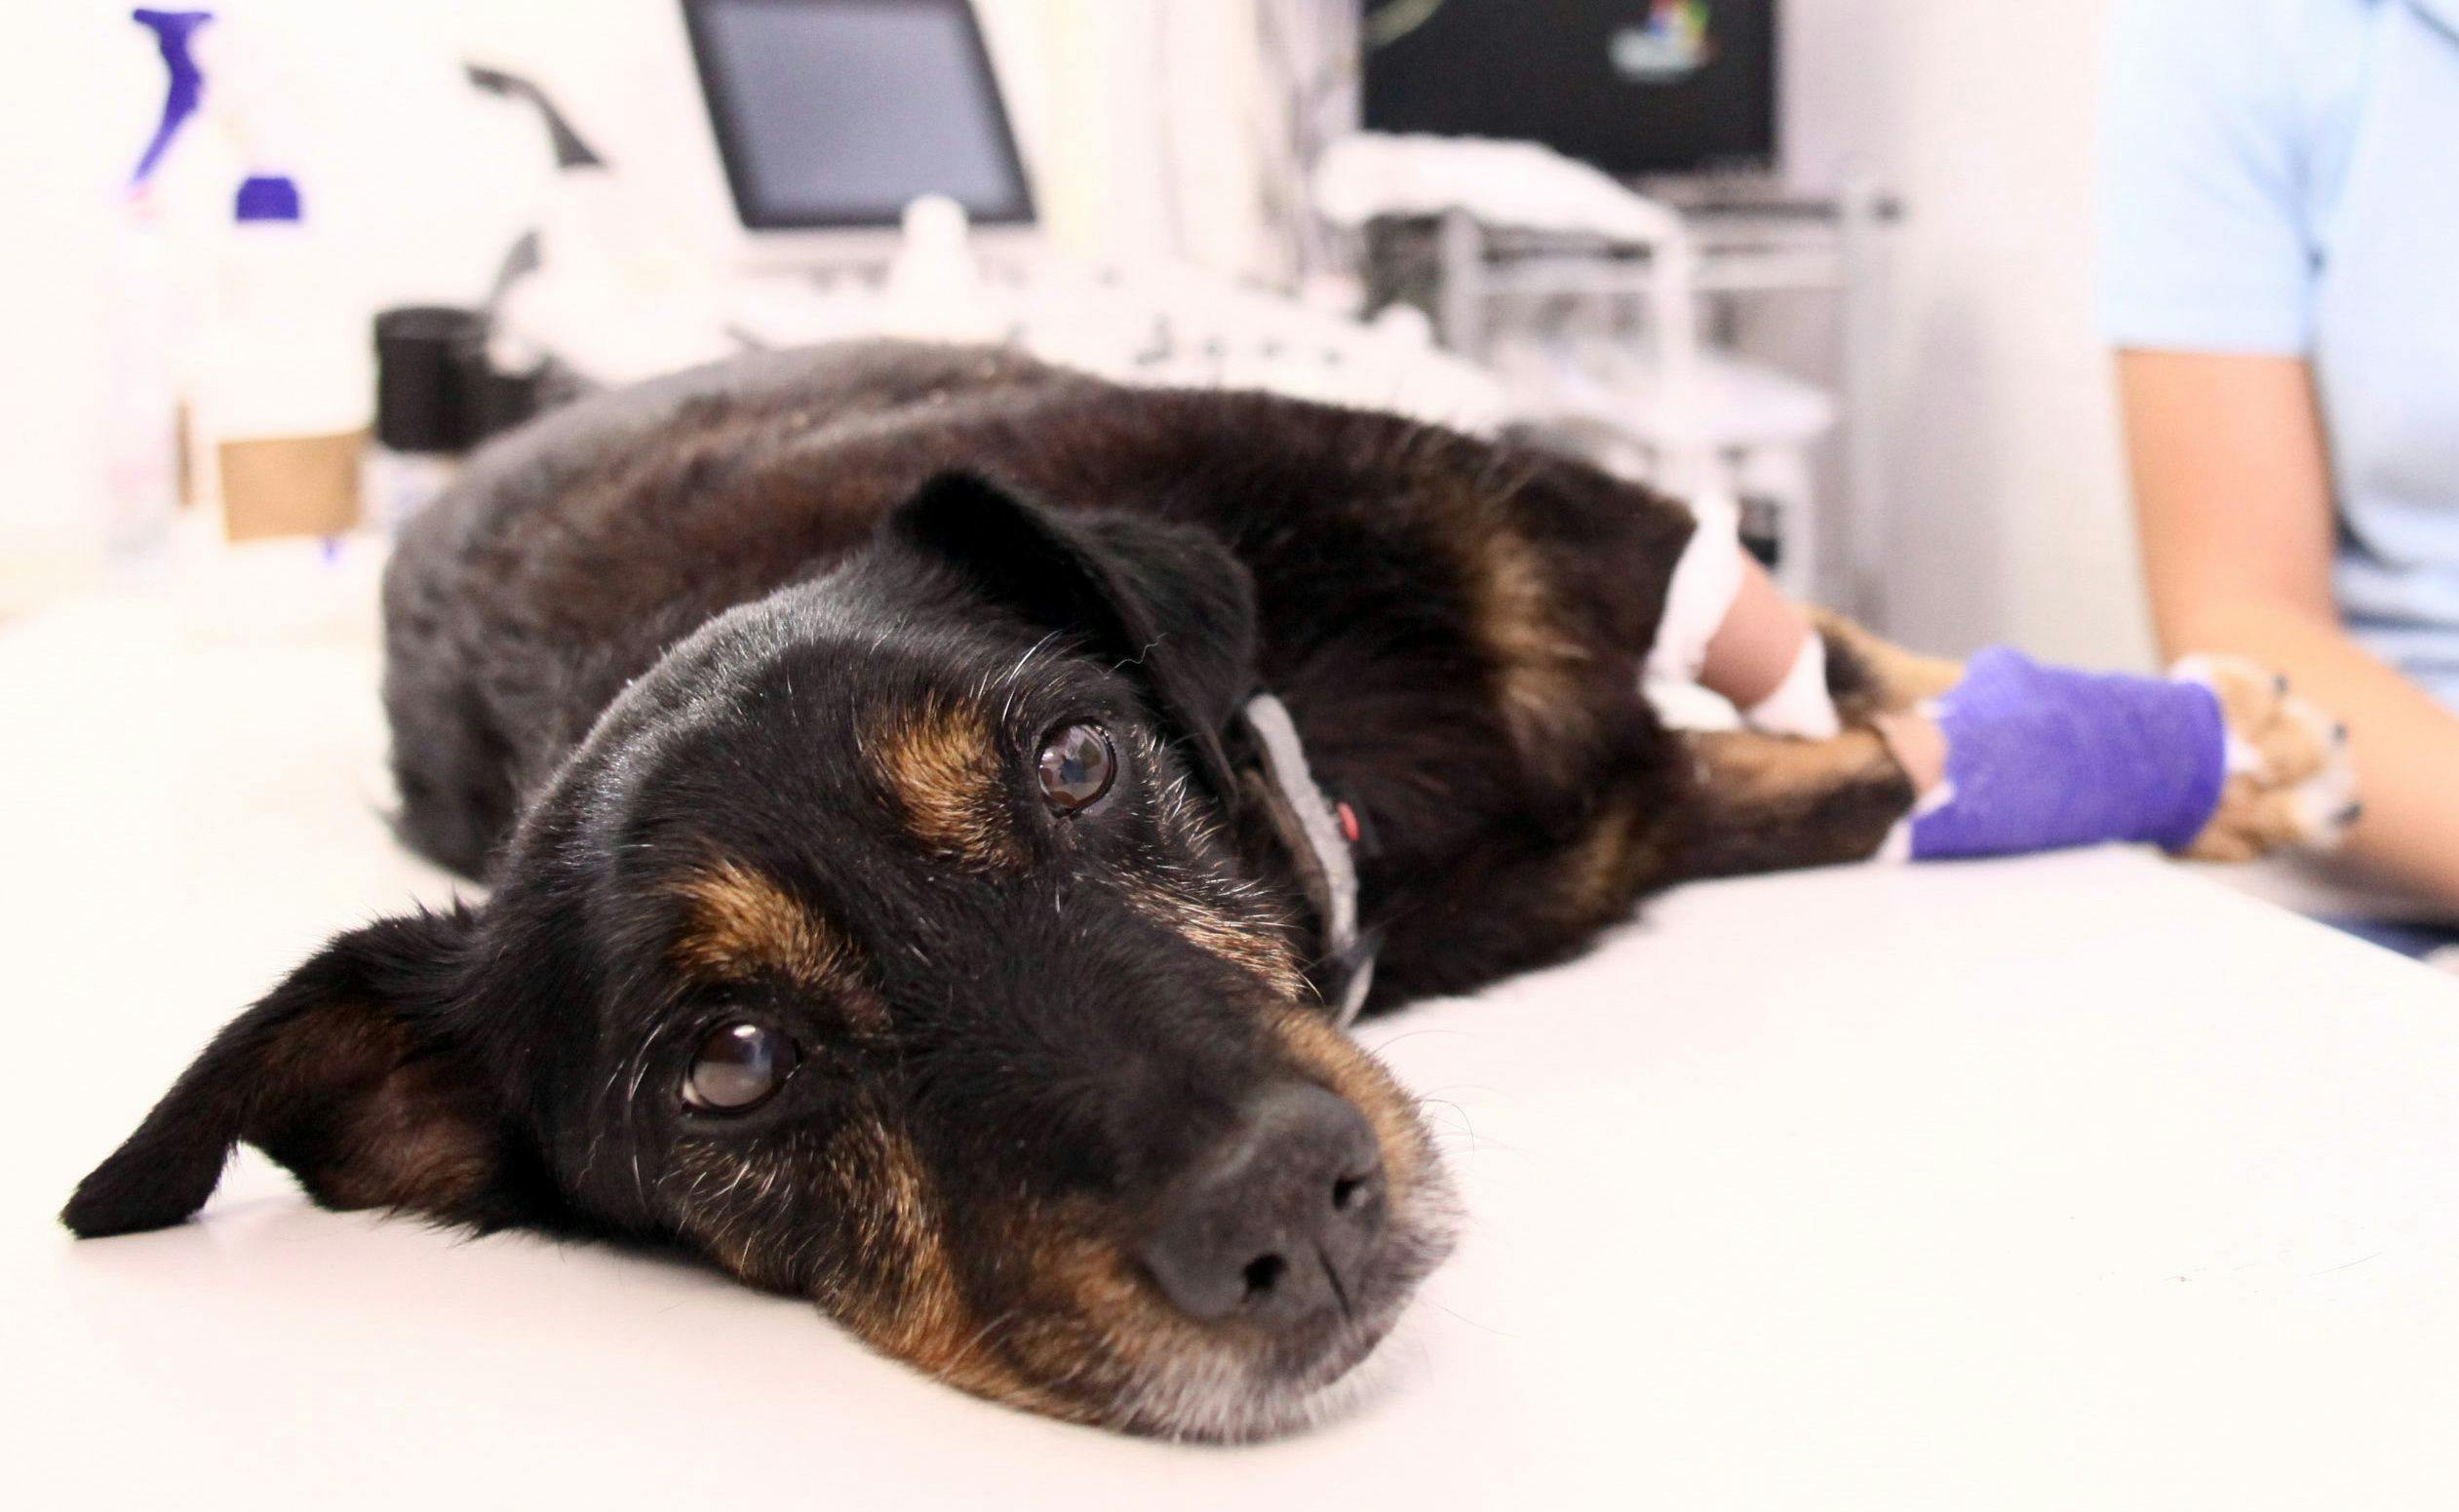 3 Must-reads on veterinary surgery